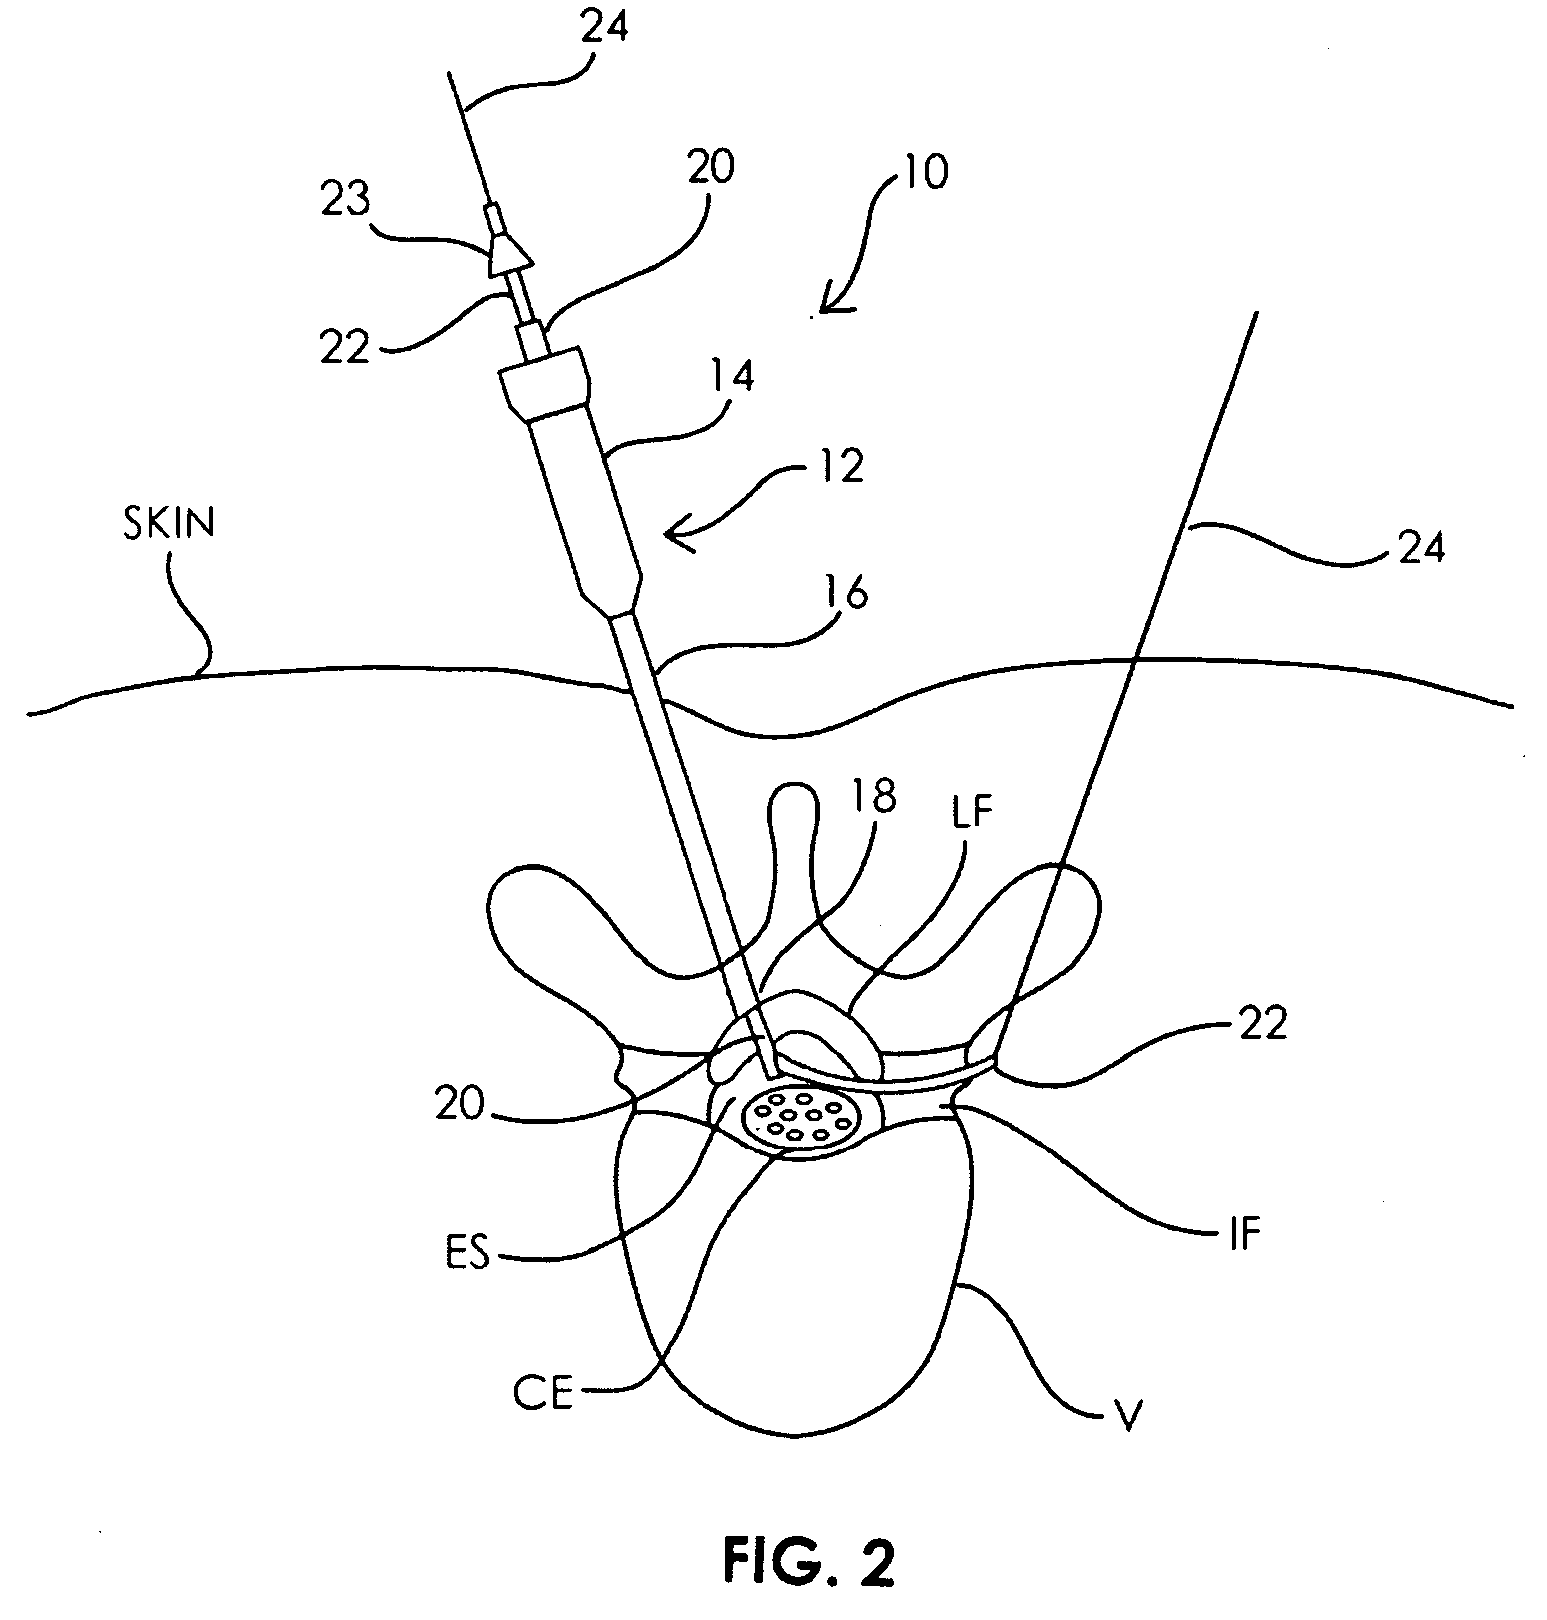 Spinal access system and method